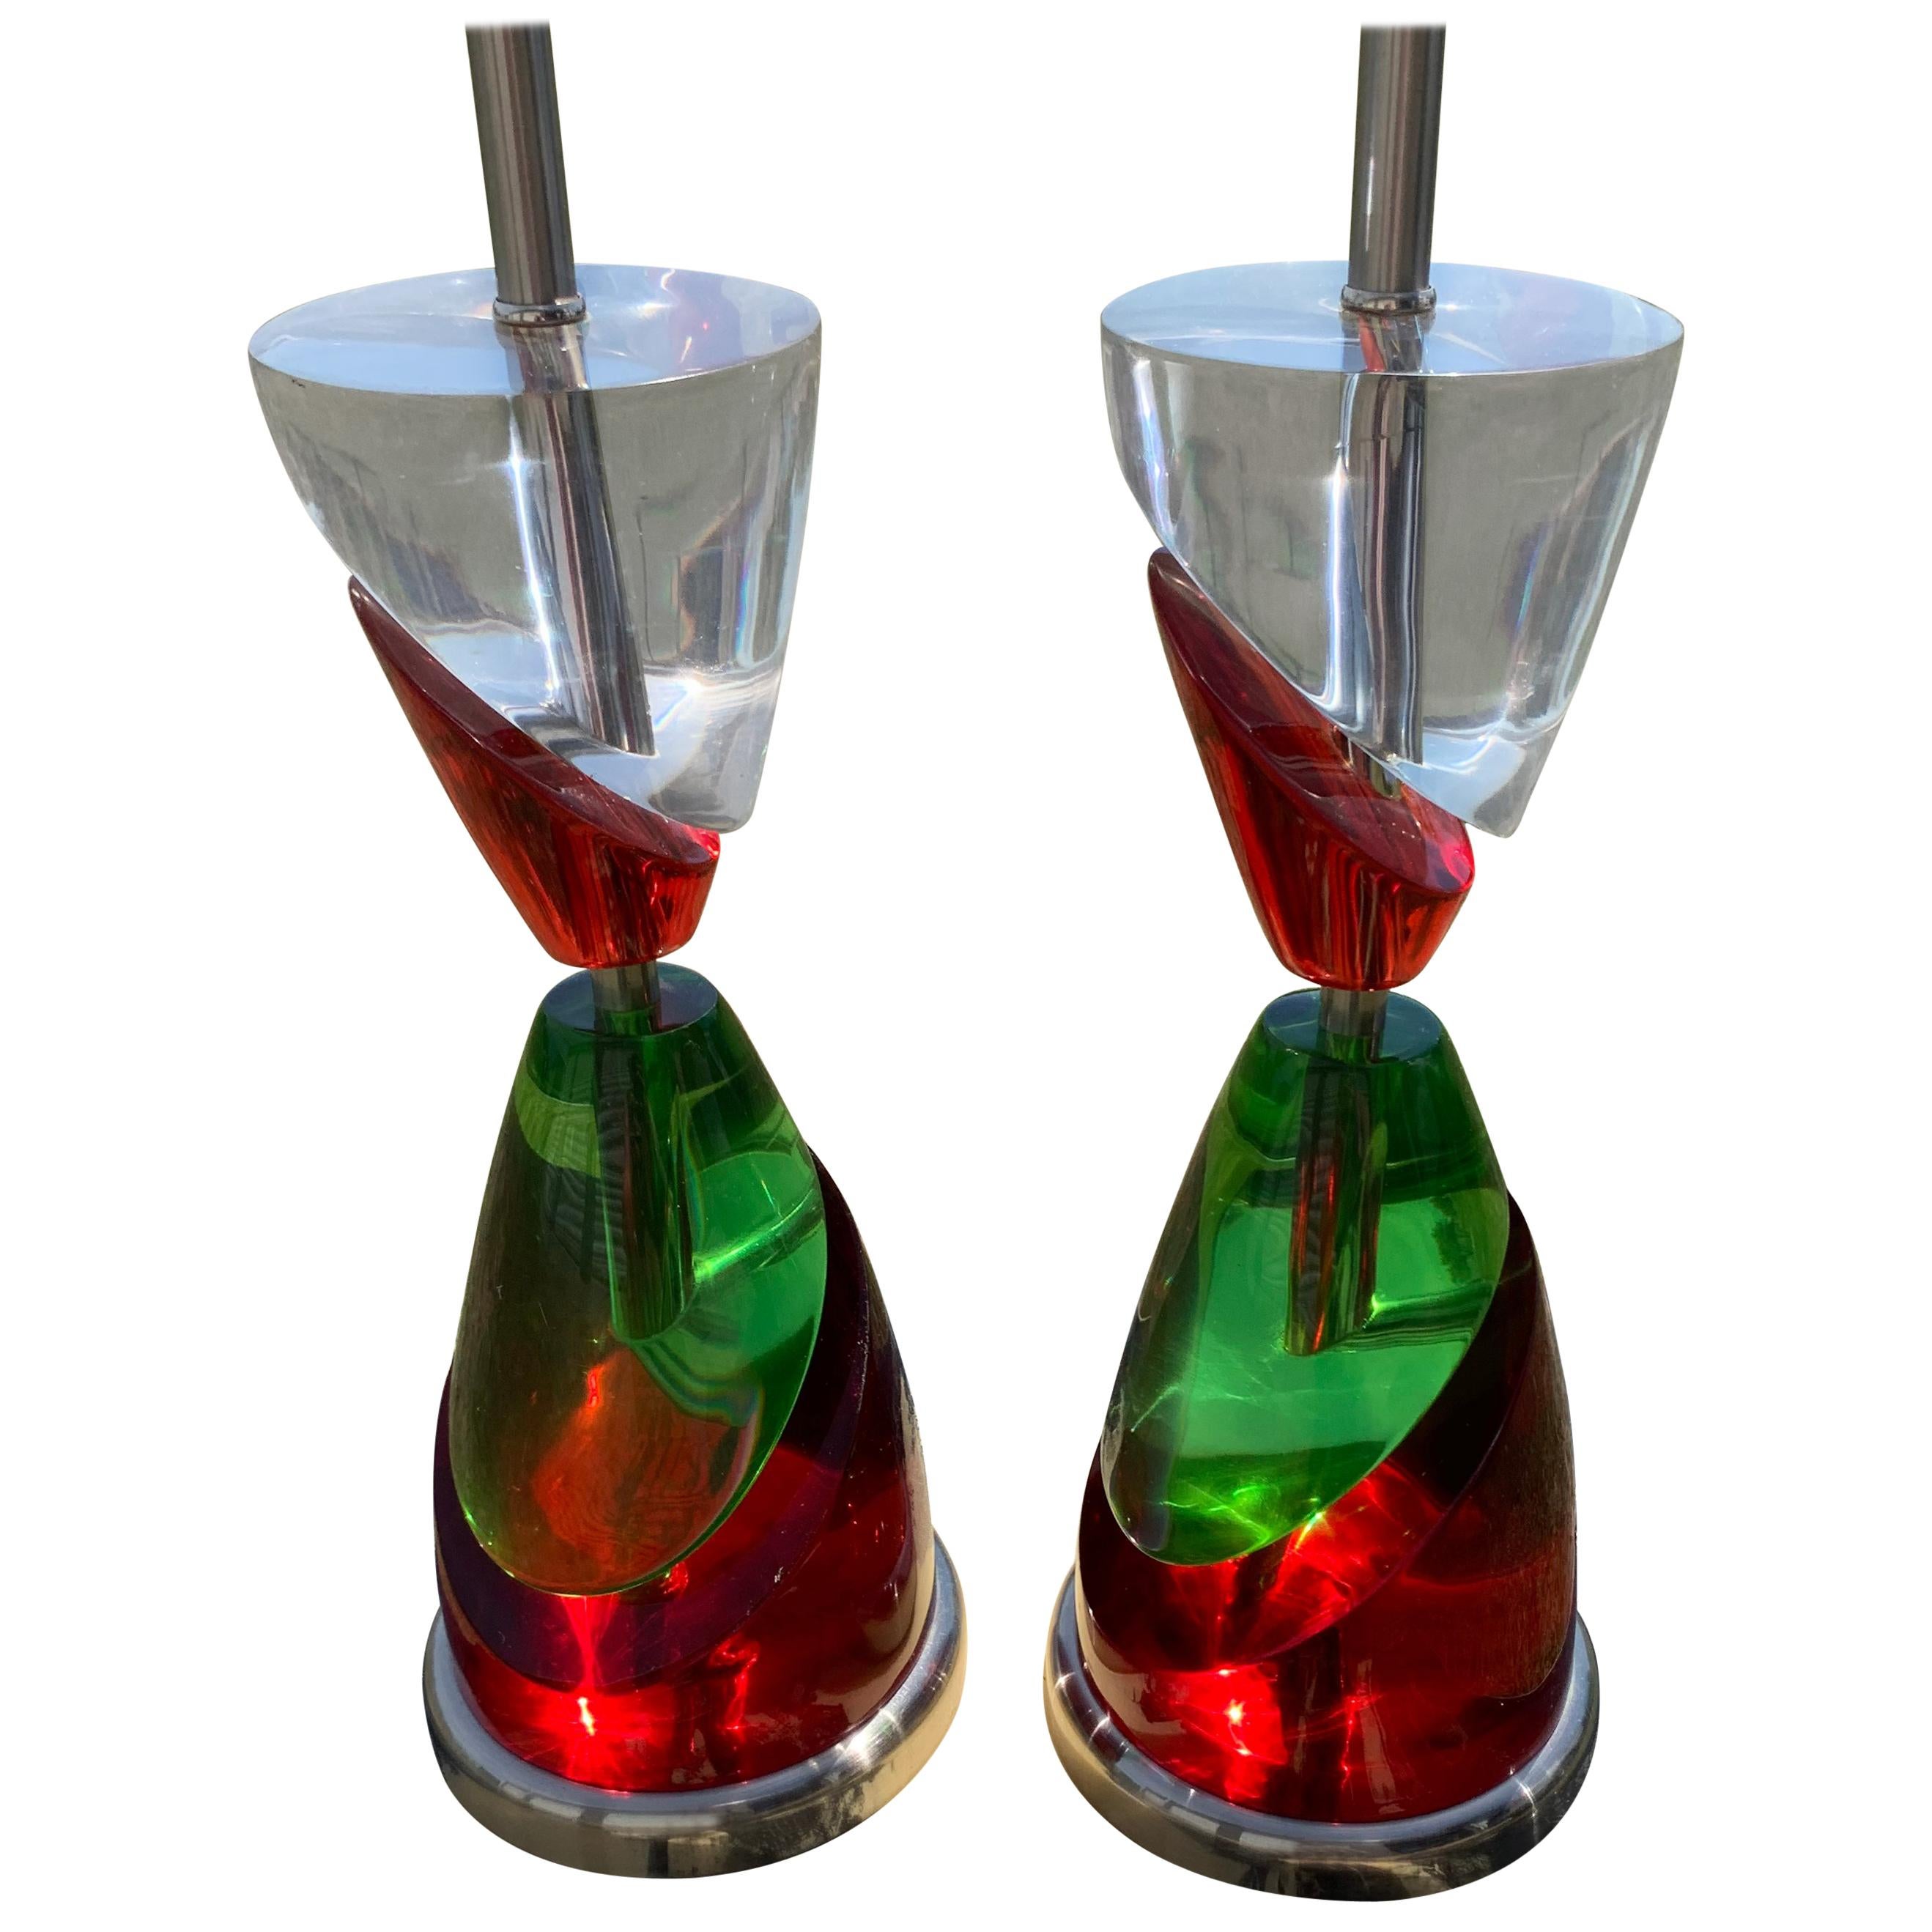 Pair of vintage red and green Lucite table lamps.
Lamps are newly rewired.